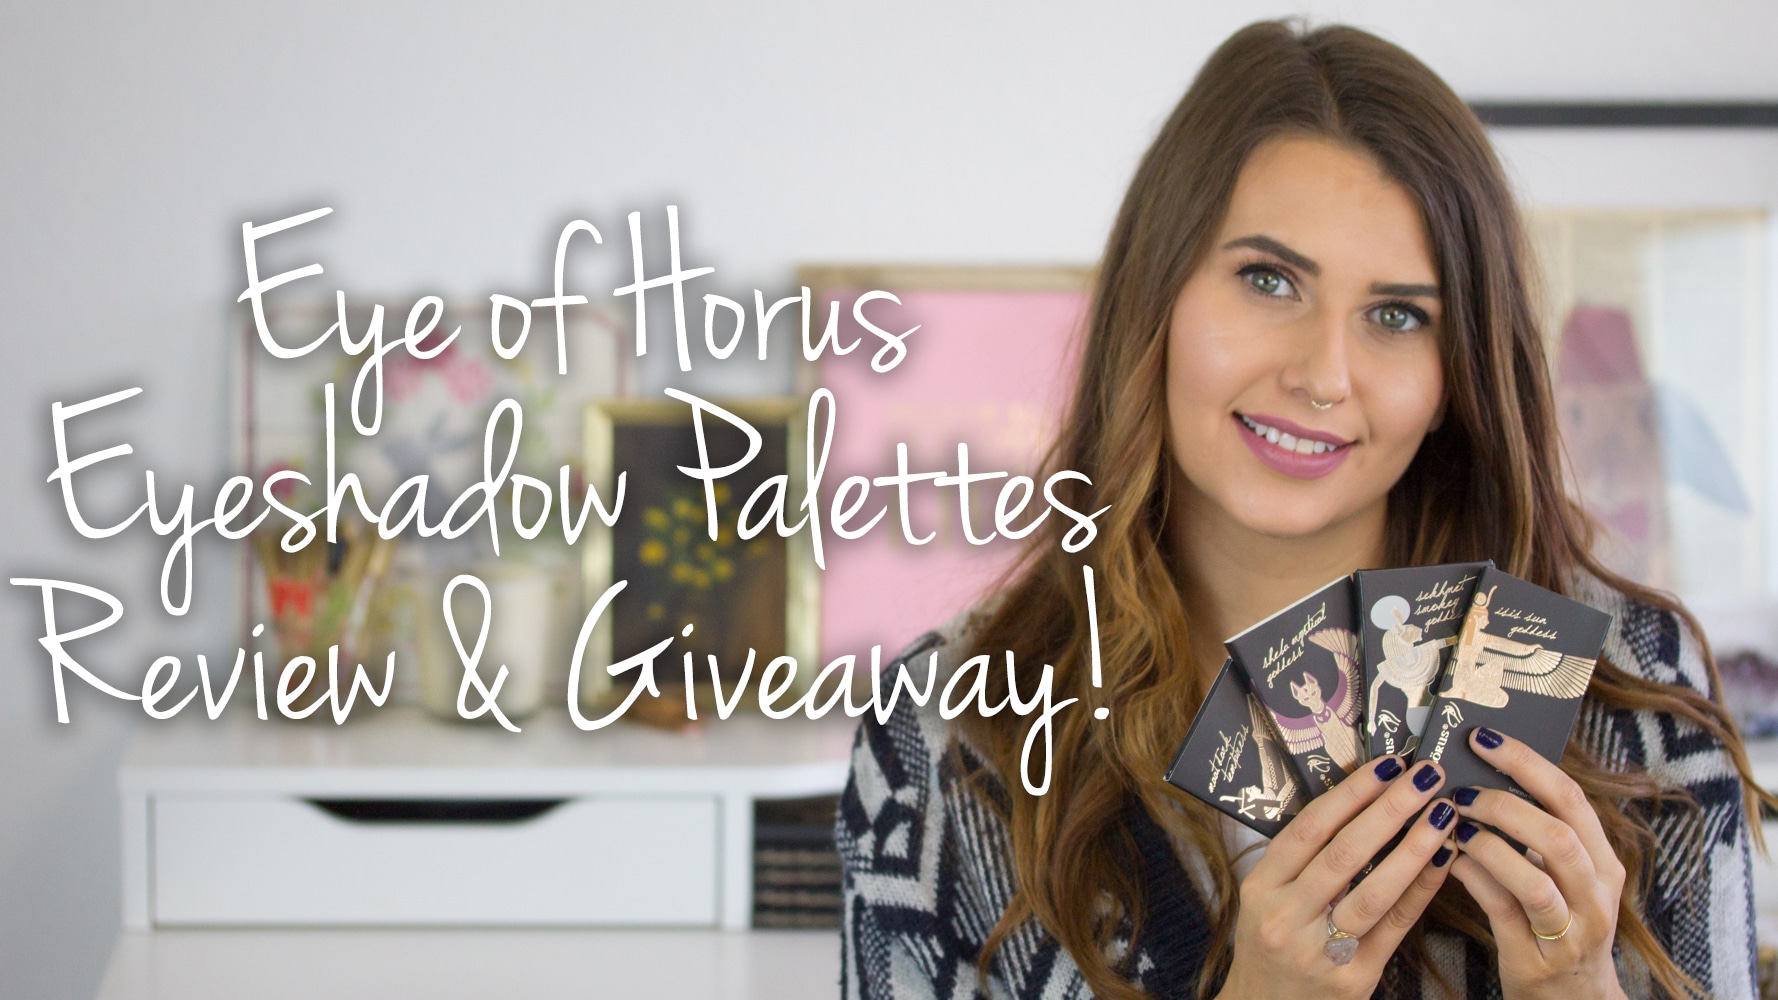 Eye of Horus Eyeshadow Palettes Review & Giveaway!